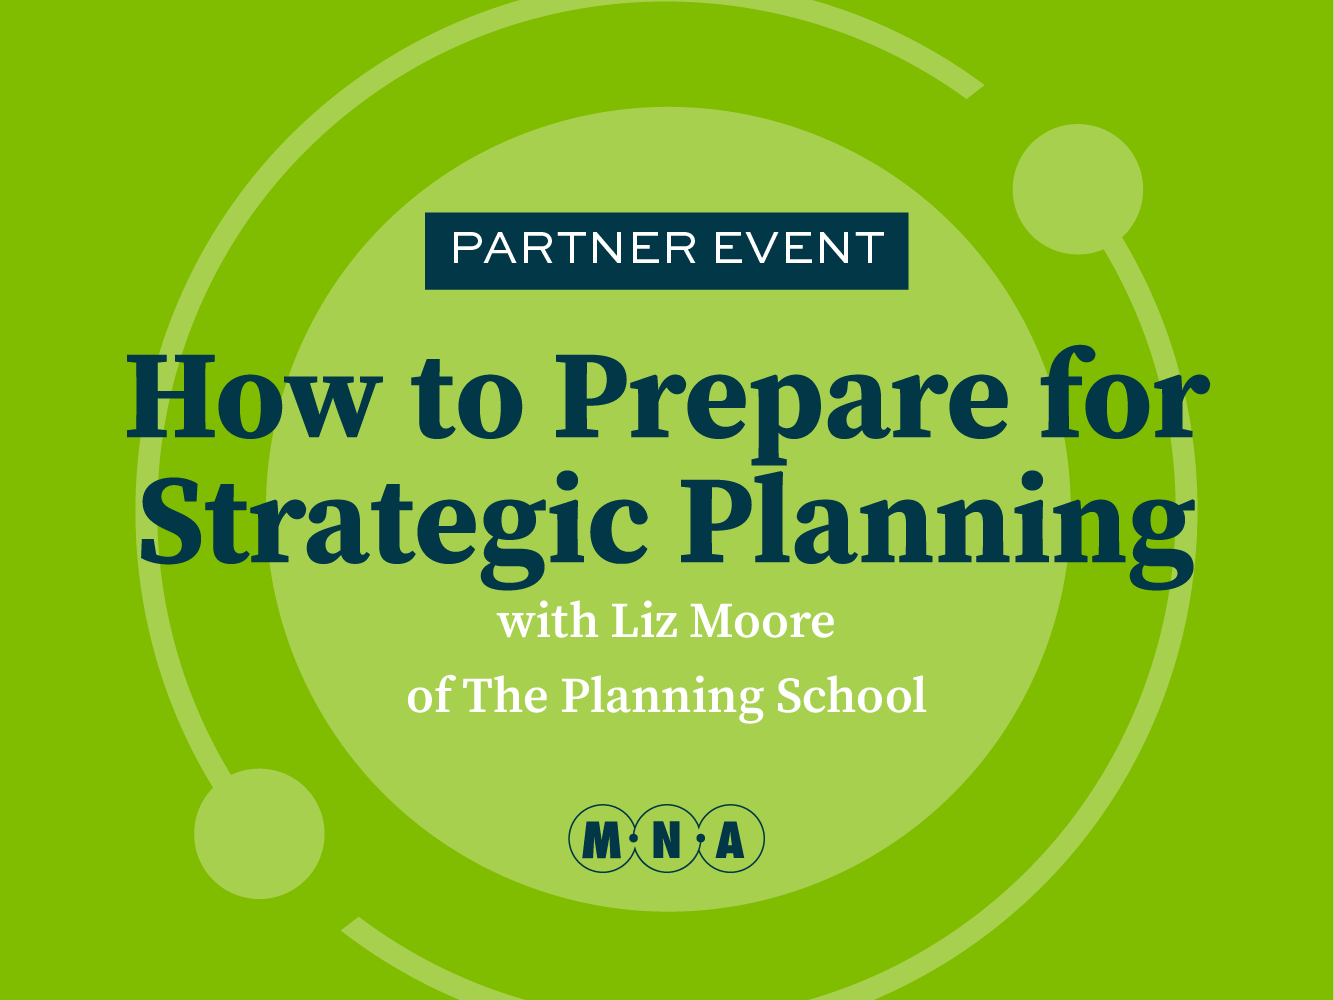 Green background with text: Partner Event, How to Prepare for Strategic Planning with Liz Moore of The Planning School